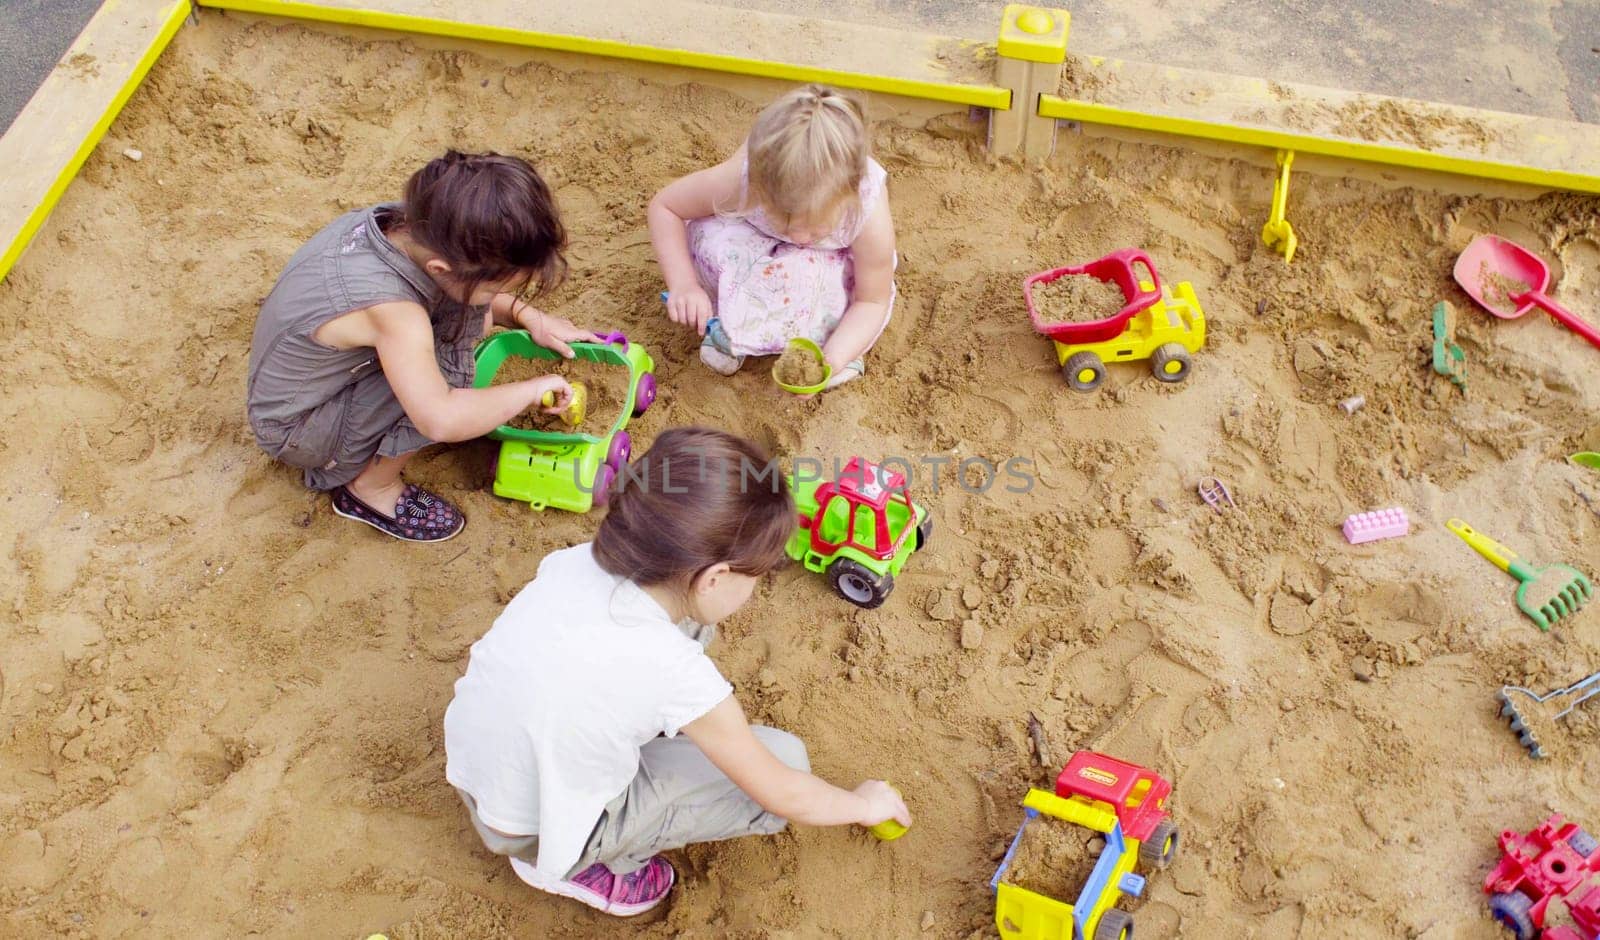 Top view. Three girls sitting in a sandbox and playing sand